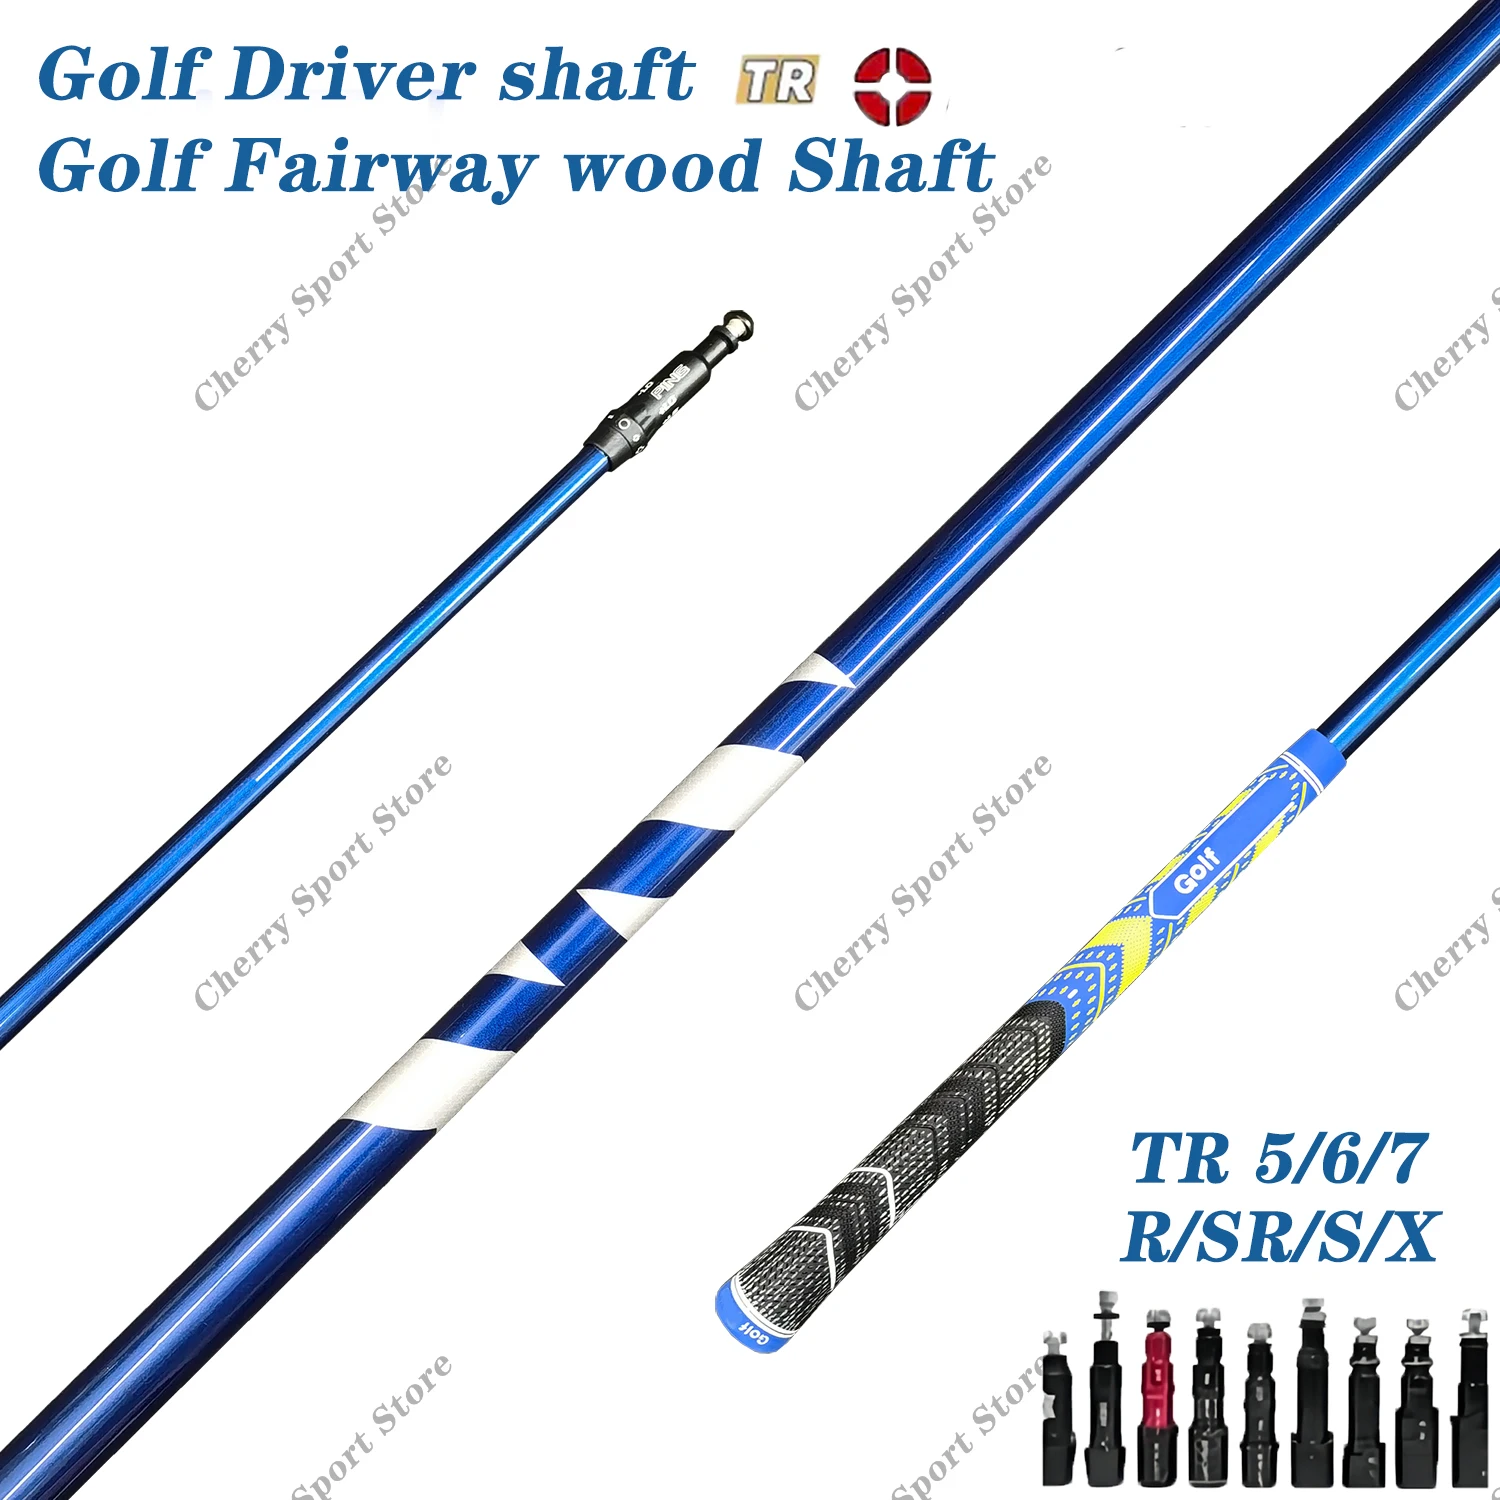 

Golf Drivers Shaft Fuji-Ven TR 5/6/7 Blue Color Highly Elastic Graphite Club Shafts Flex R/S/X Free Assembly Sleeve And Grip